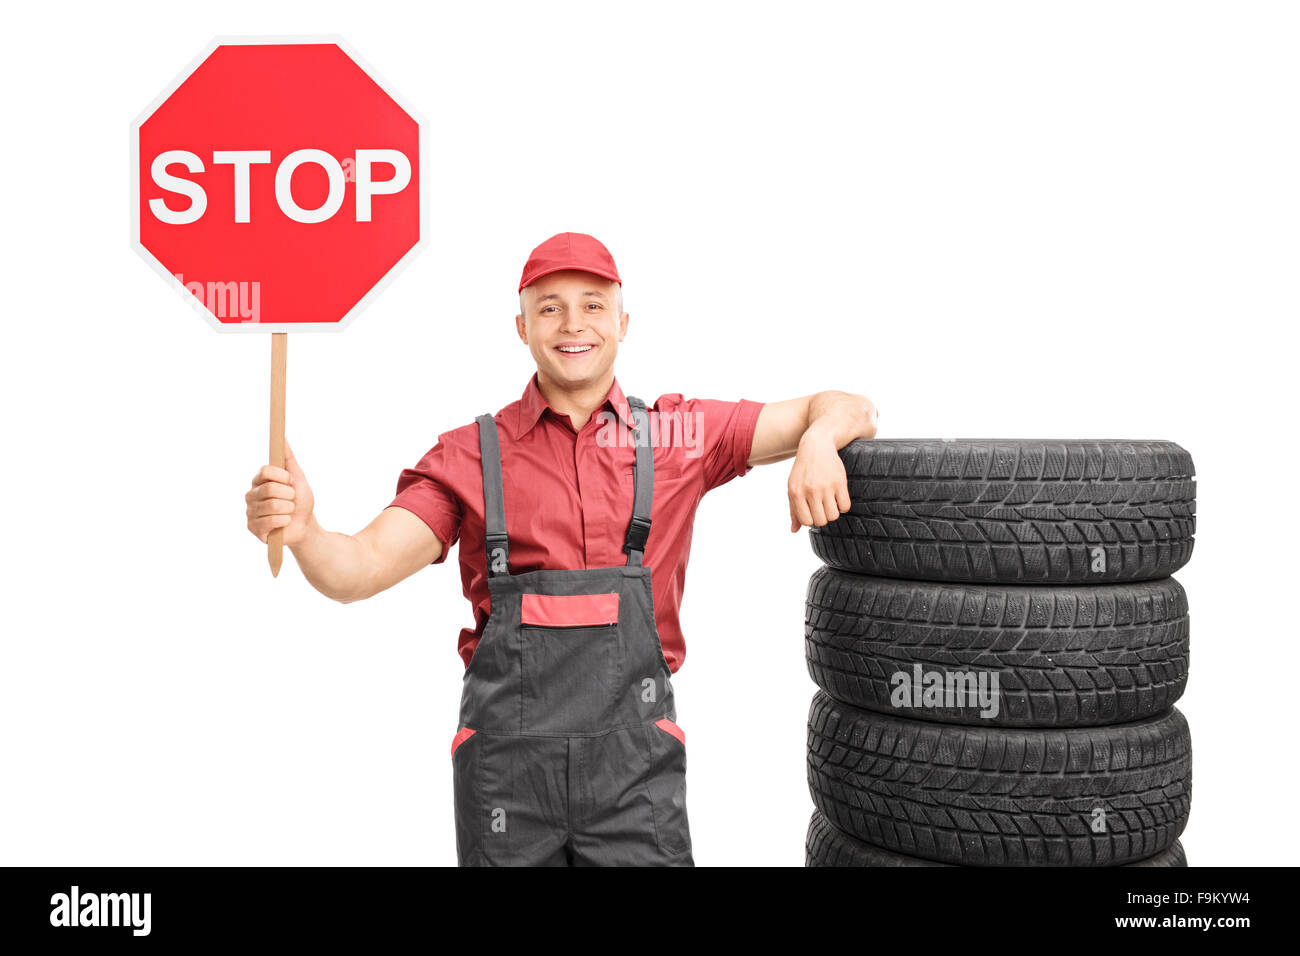 Young male mechanic holding a big red stop sign and leaning on a stack of tires isolated on white background Stock Photo